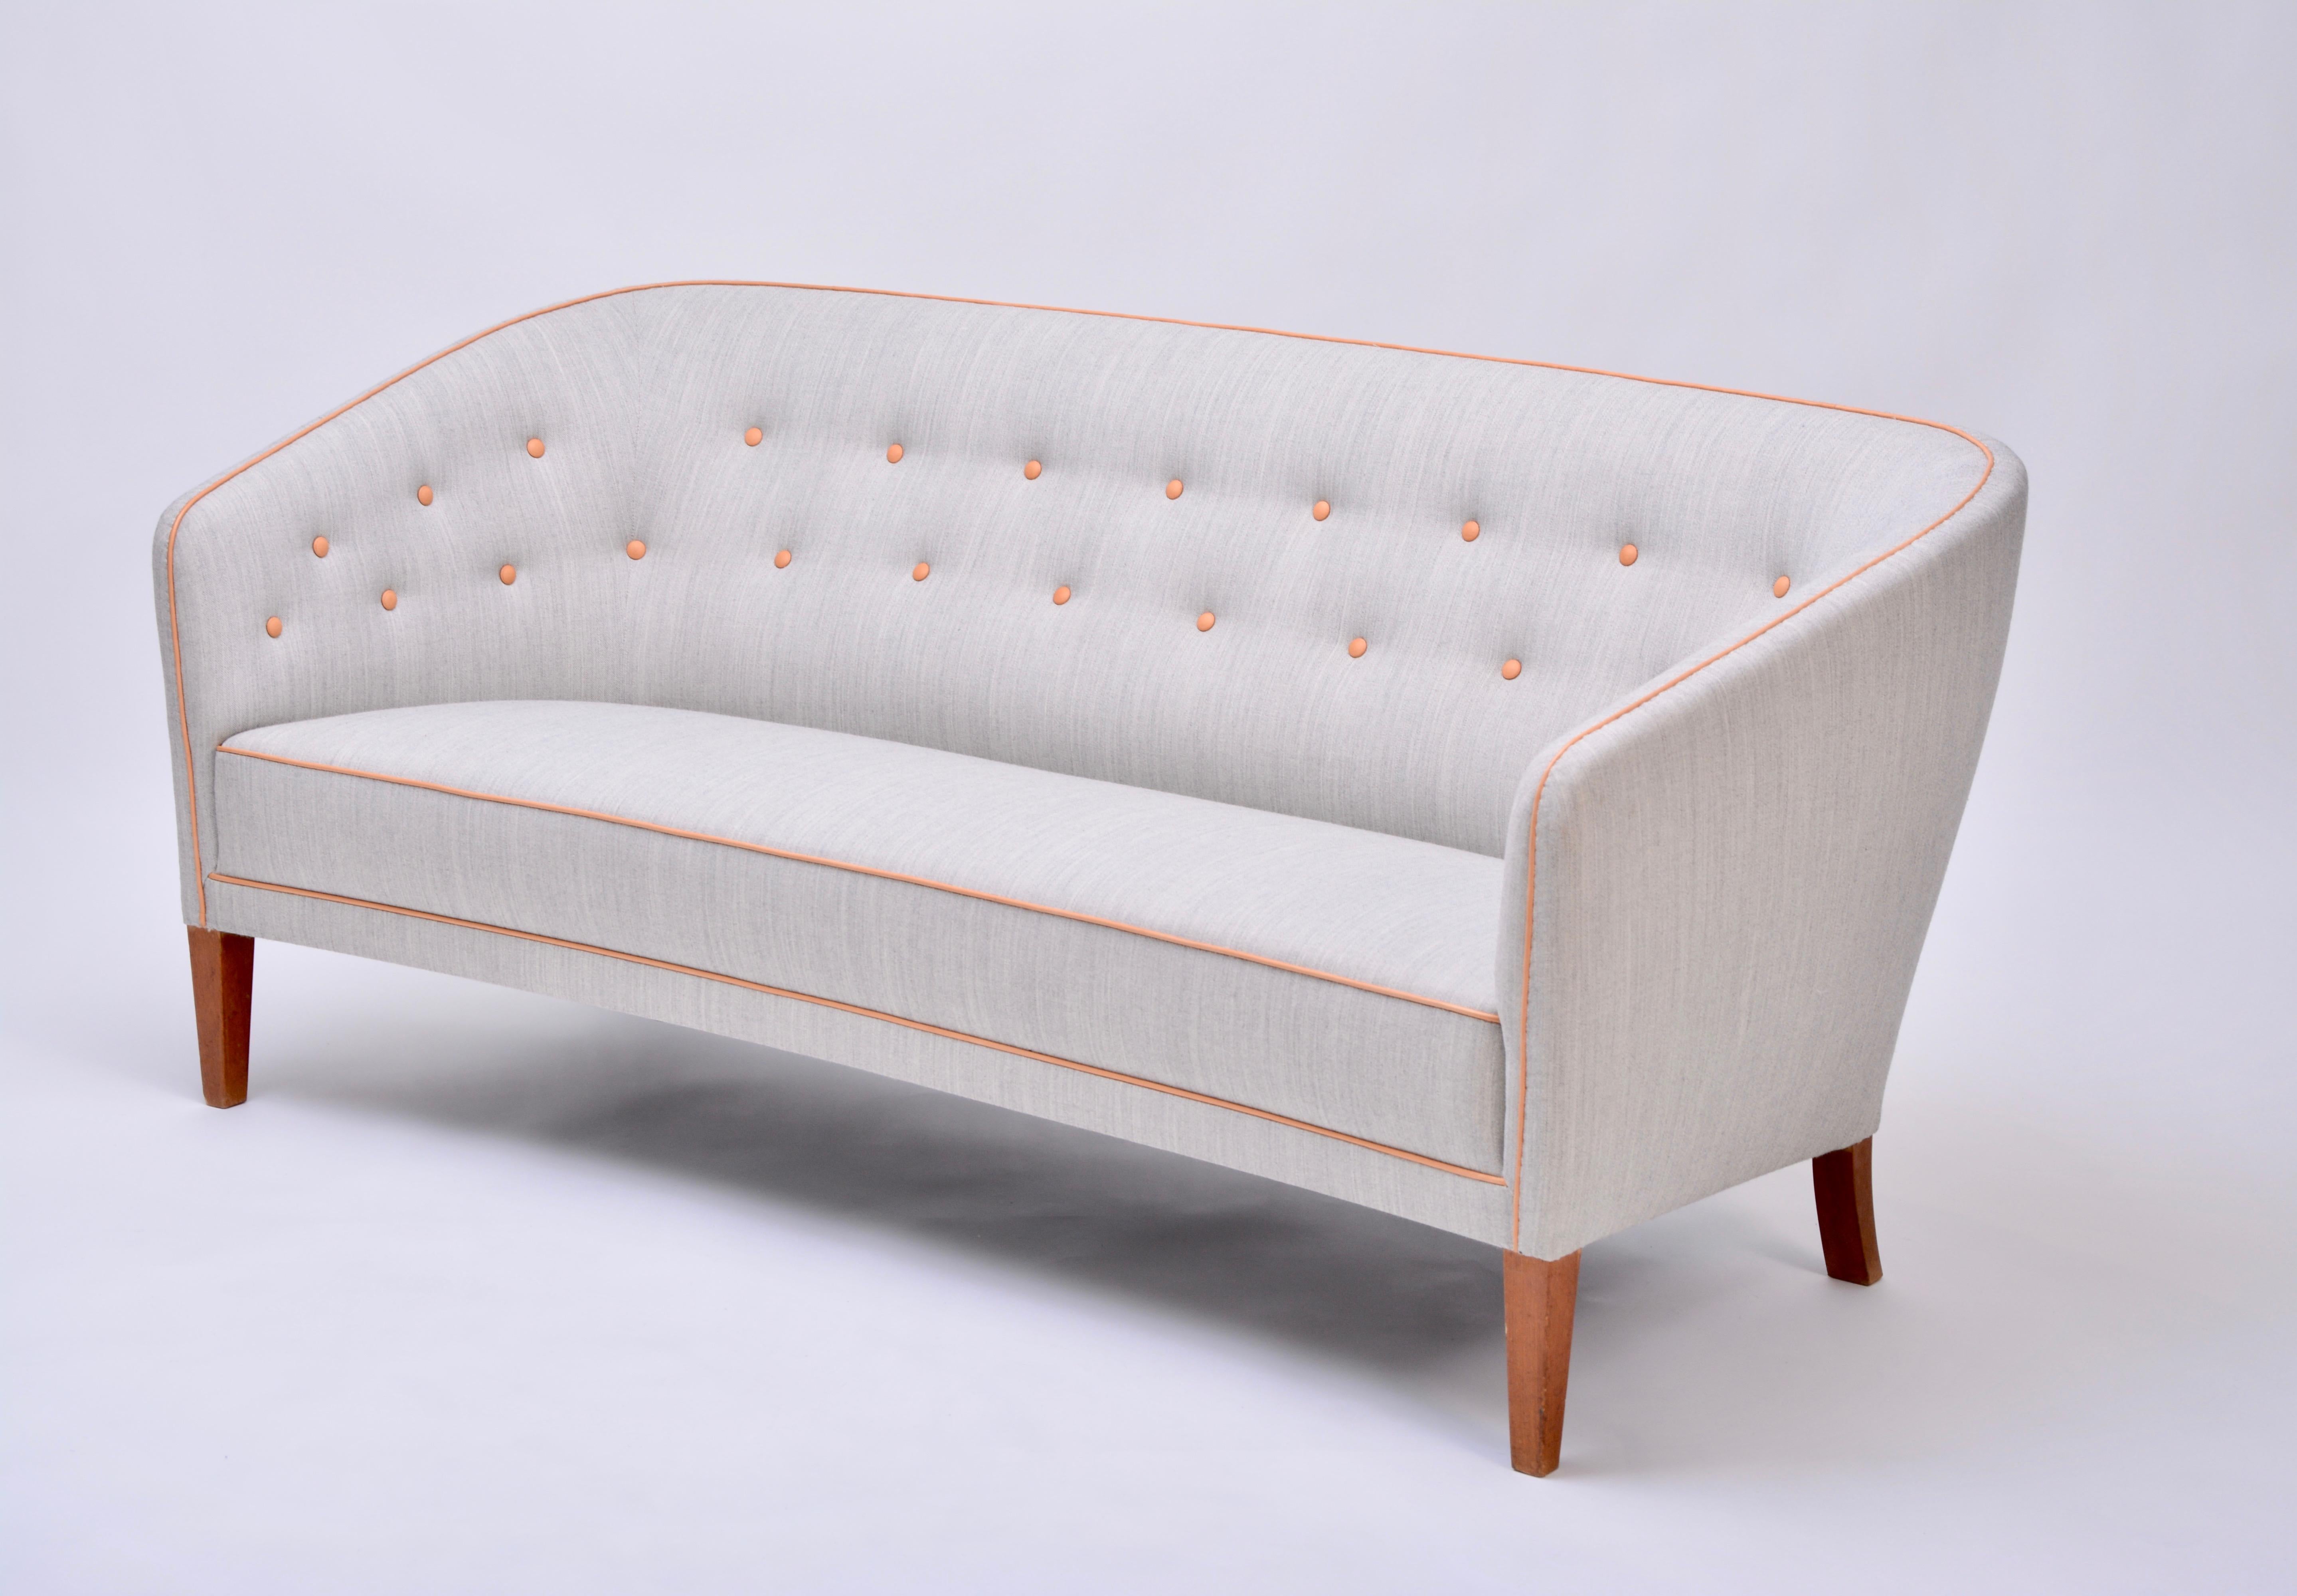 Grey Danish Mid-Century Modern three-seat sofa by Ludvig Pontoppidan 

Gorgeous three-seat sofa with elegant curves designed and produced by Danish master craftsman Ludvig Pontoppidan. The sofa is in very good condition, as it has been reuphostered